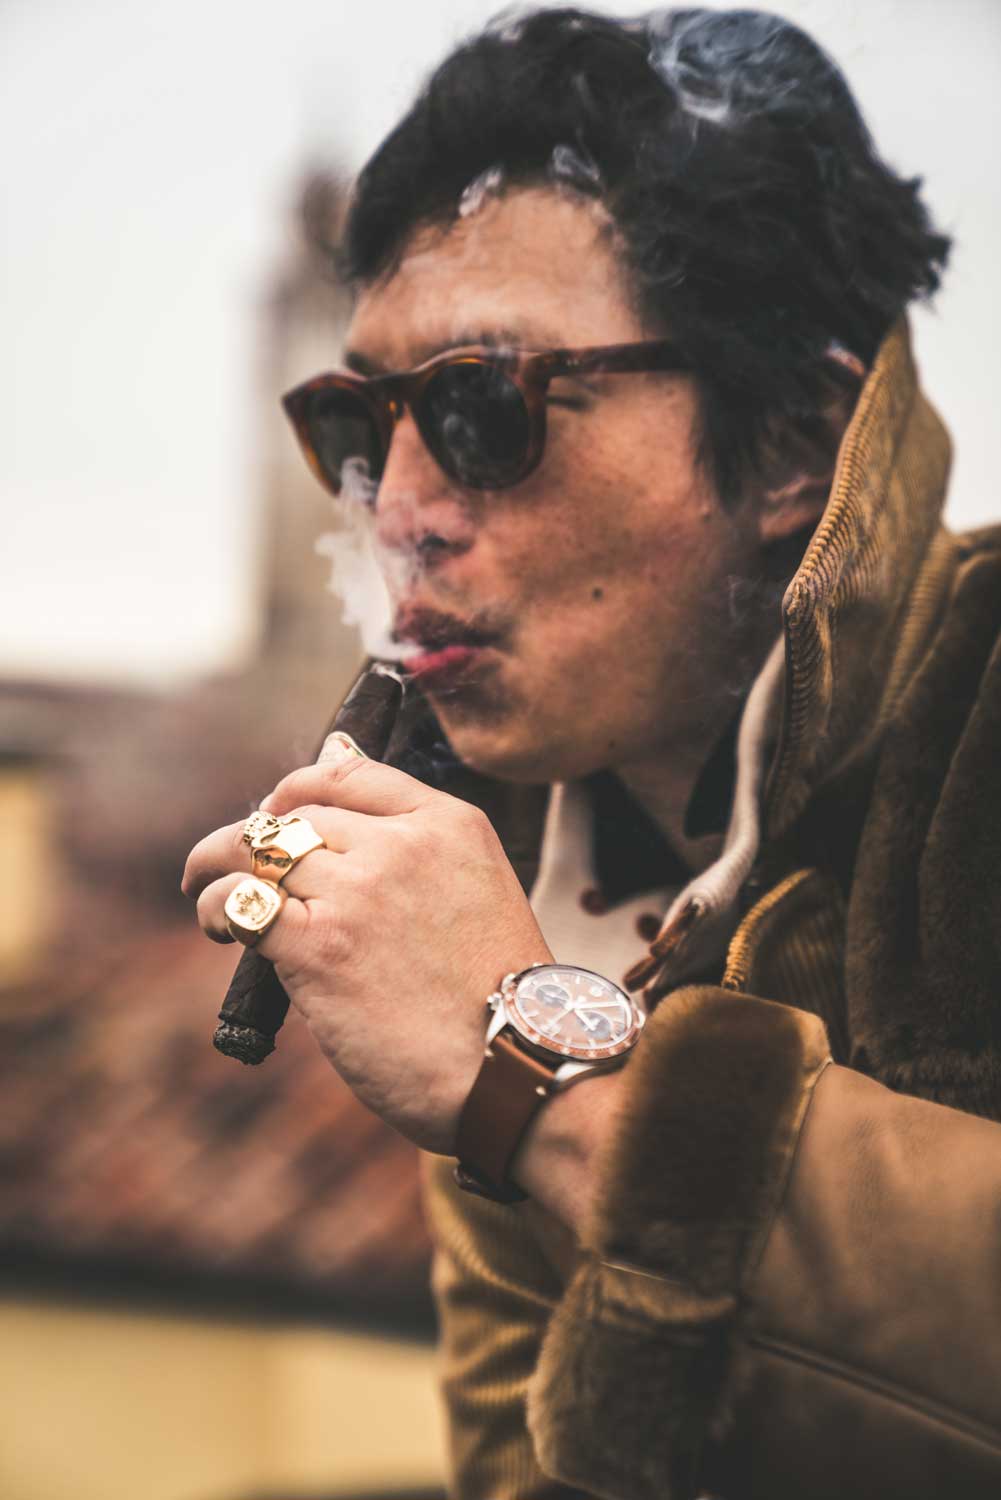 A winter's smoke of the rooftop of the Gritti Palace in 2018, on Wei's wrist the Bell & Ross "Dusty" (©Revolution)